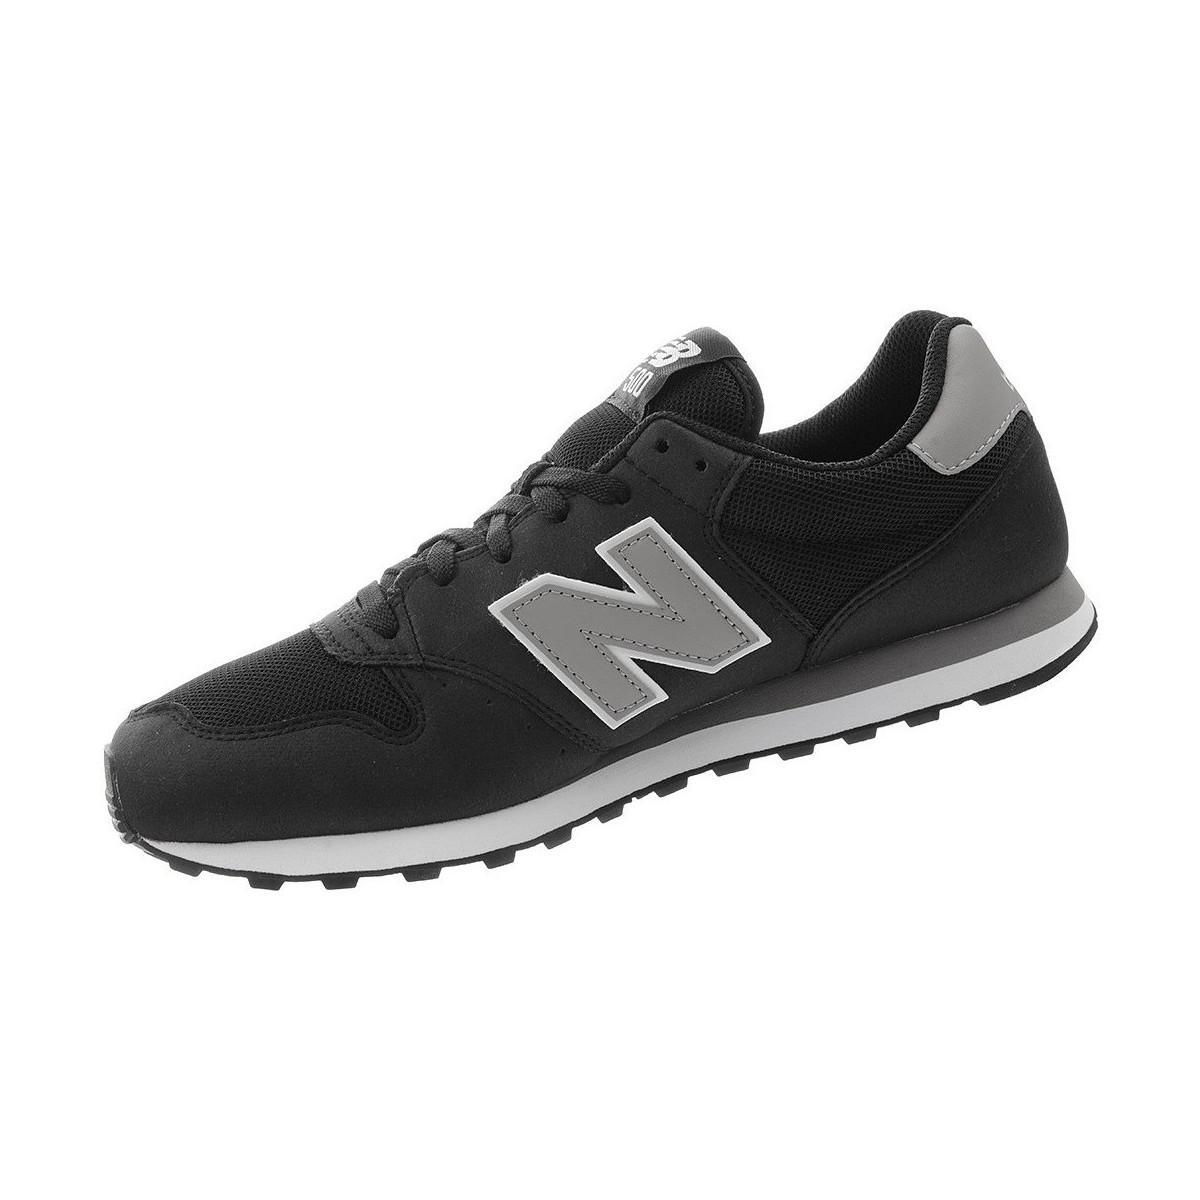 Men's Shoes (trainers) In Black - Discount Store